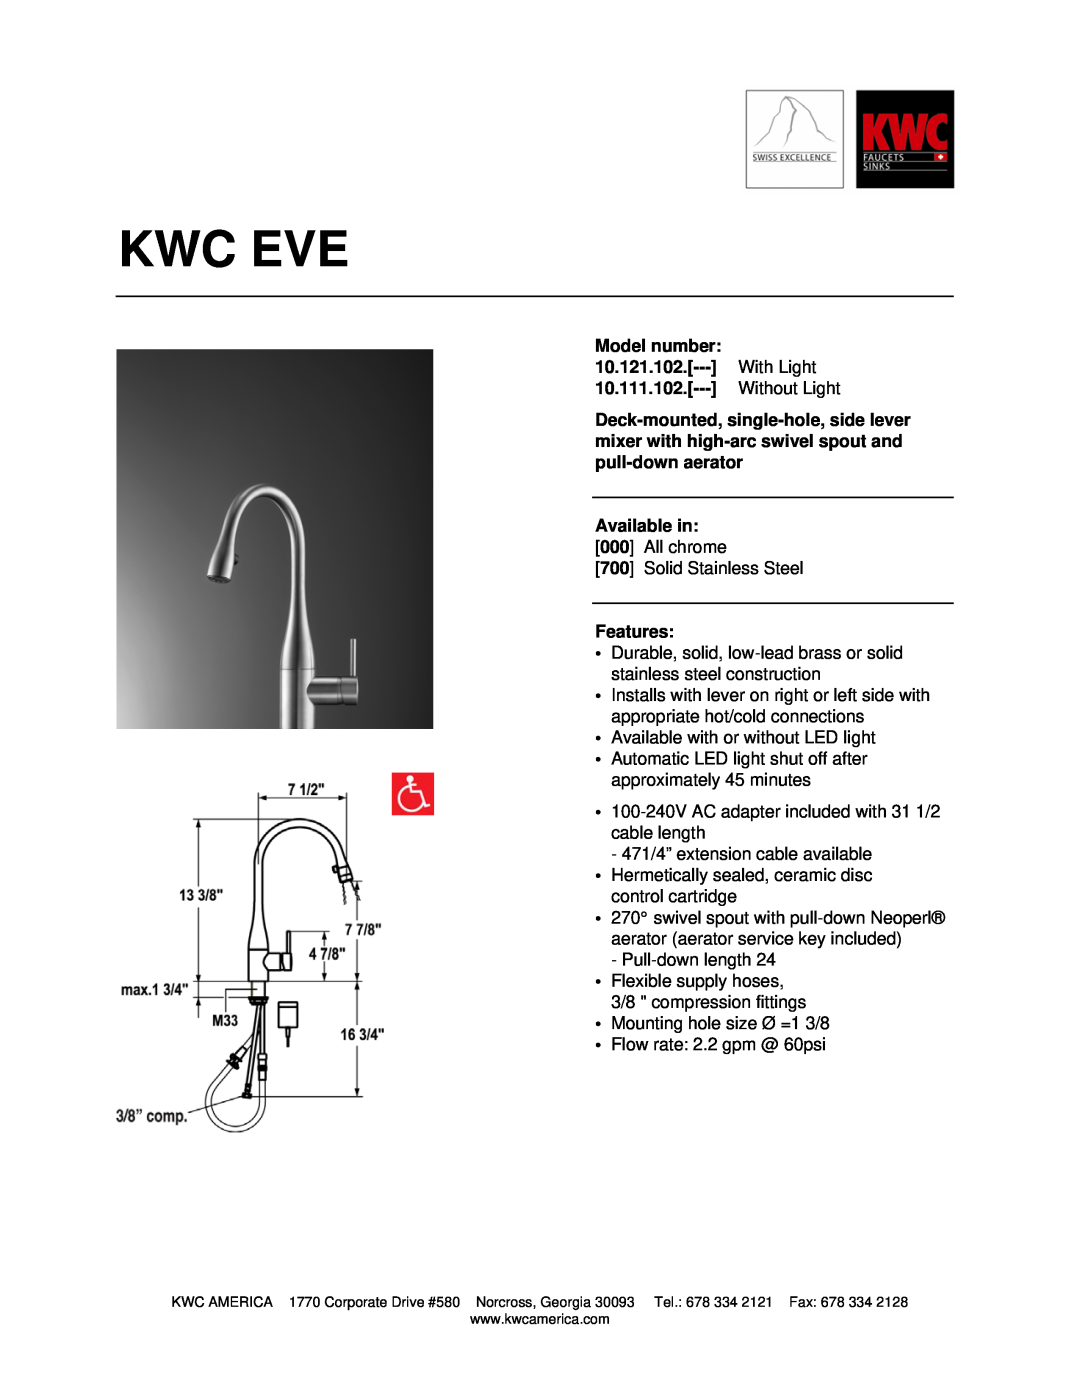 KWC 10.111.102 manual Kwc Eve, Model number, 10.121.102, With Light, Without Light, Available in, Features 